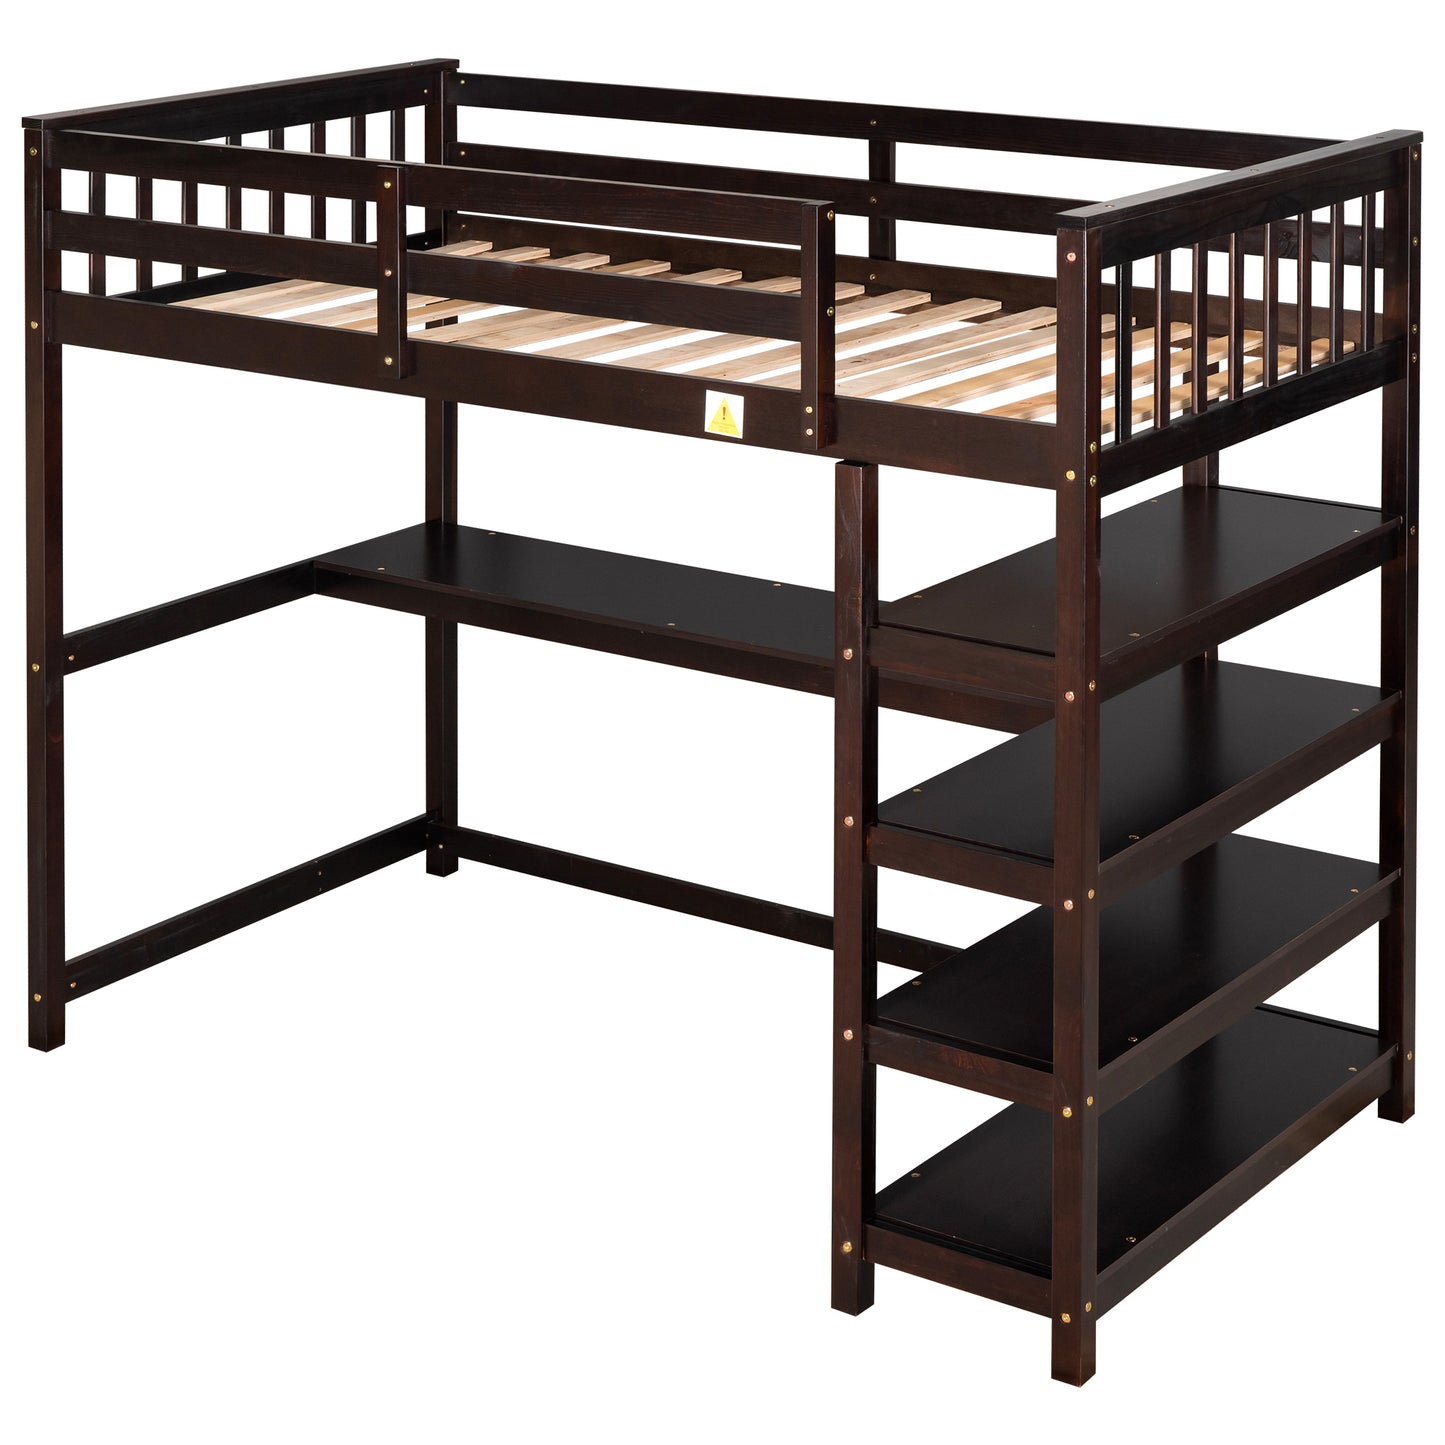 Twin Size Loft Bed with Storage Shelves and Under-bed Desk, Espresso